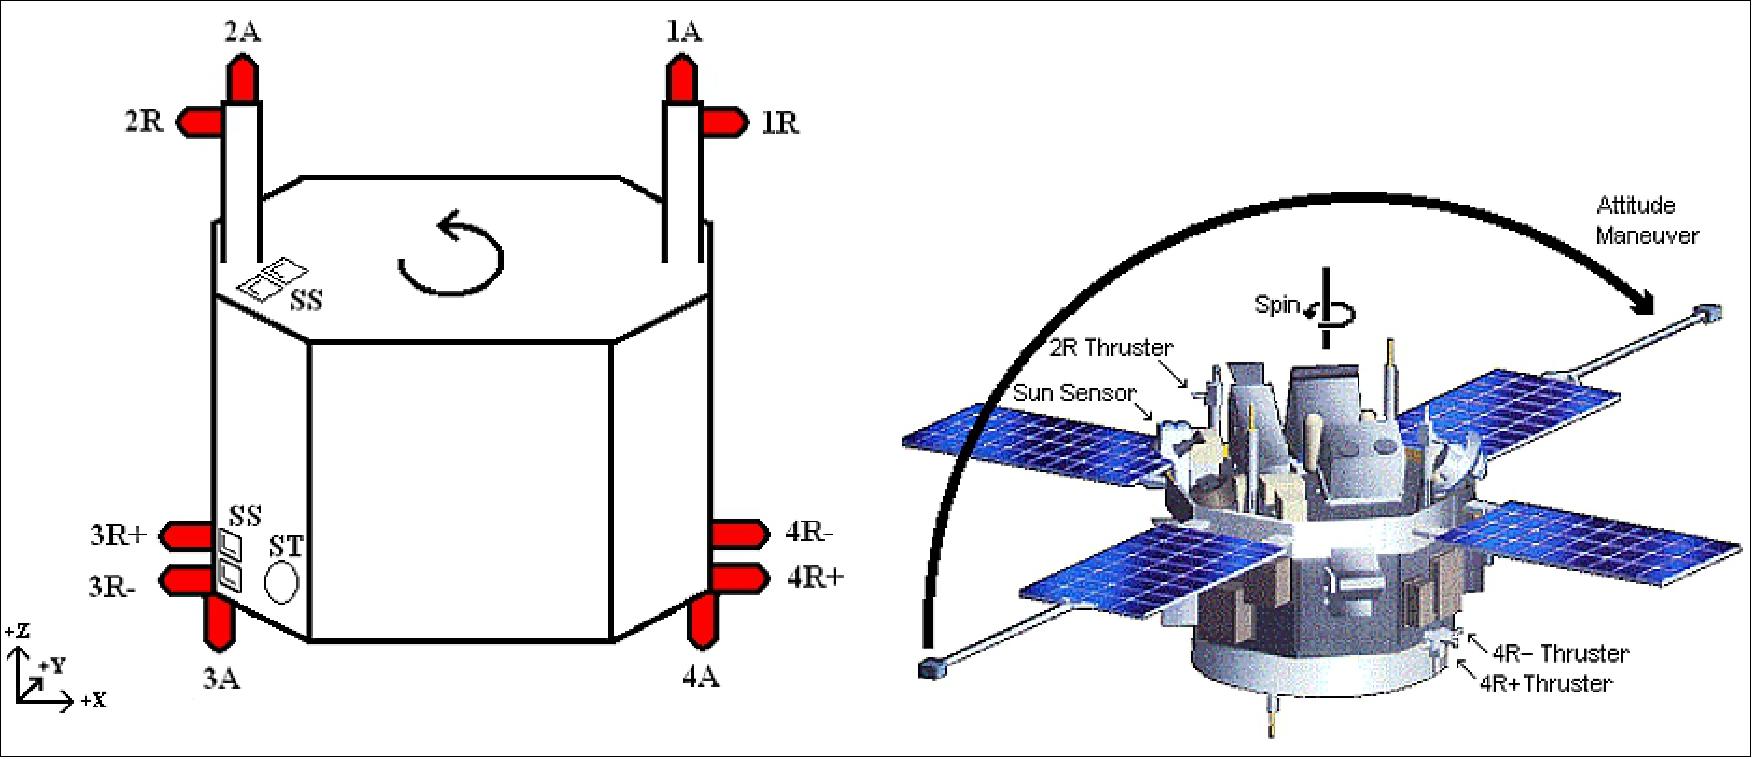 Figure 14: Locations of sun sensors (SS), star scanner (ST), and thrusters (image credit: Honeywell Technology Solutions, NASA)